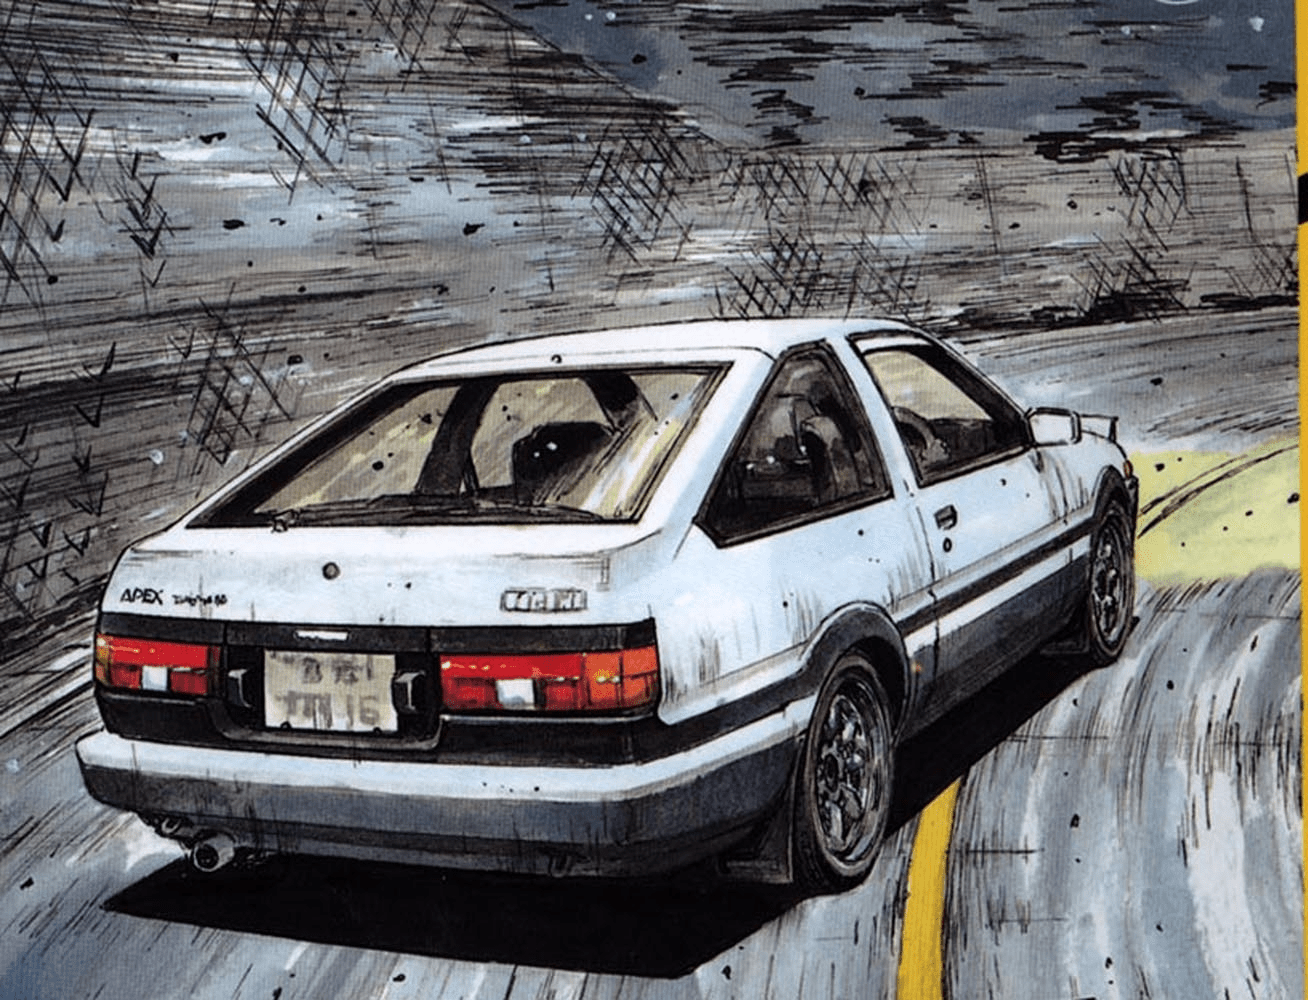 Free download 10 New Initial D Wall Paper FULL HD 1080p For PC Desktop Initial [1308x1000] for your Desktop, Mobile & Tablet. Explore Toyota Sprinter Anime Wallpaper